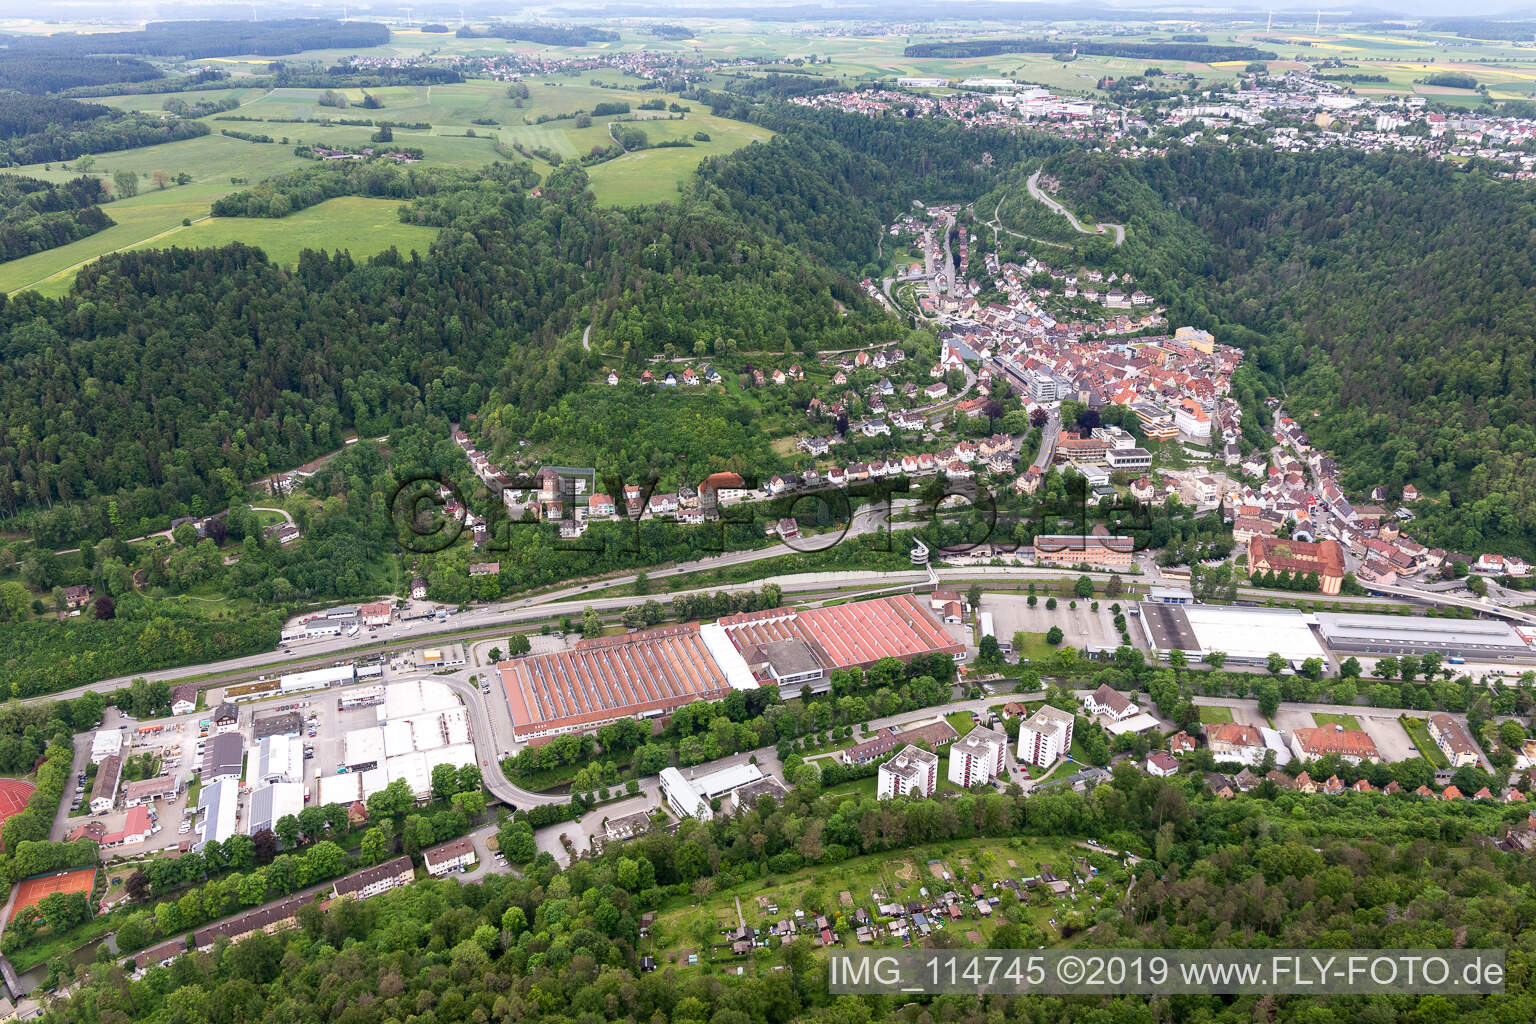 Drone image of Oberndorf am Neckar in the state Baden-Wuerttemberg, Germany